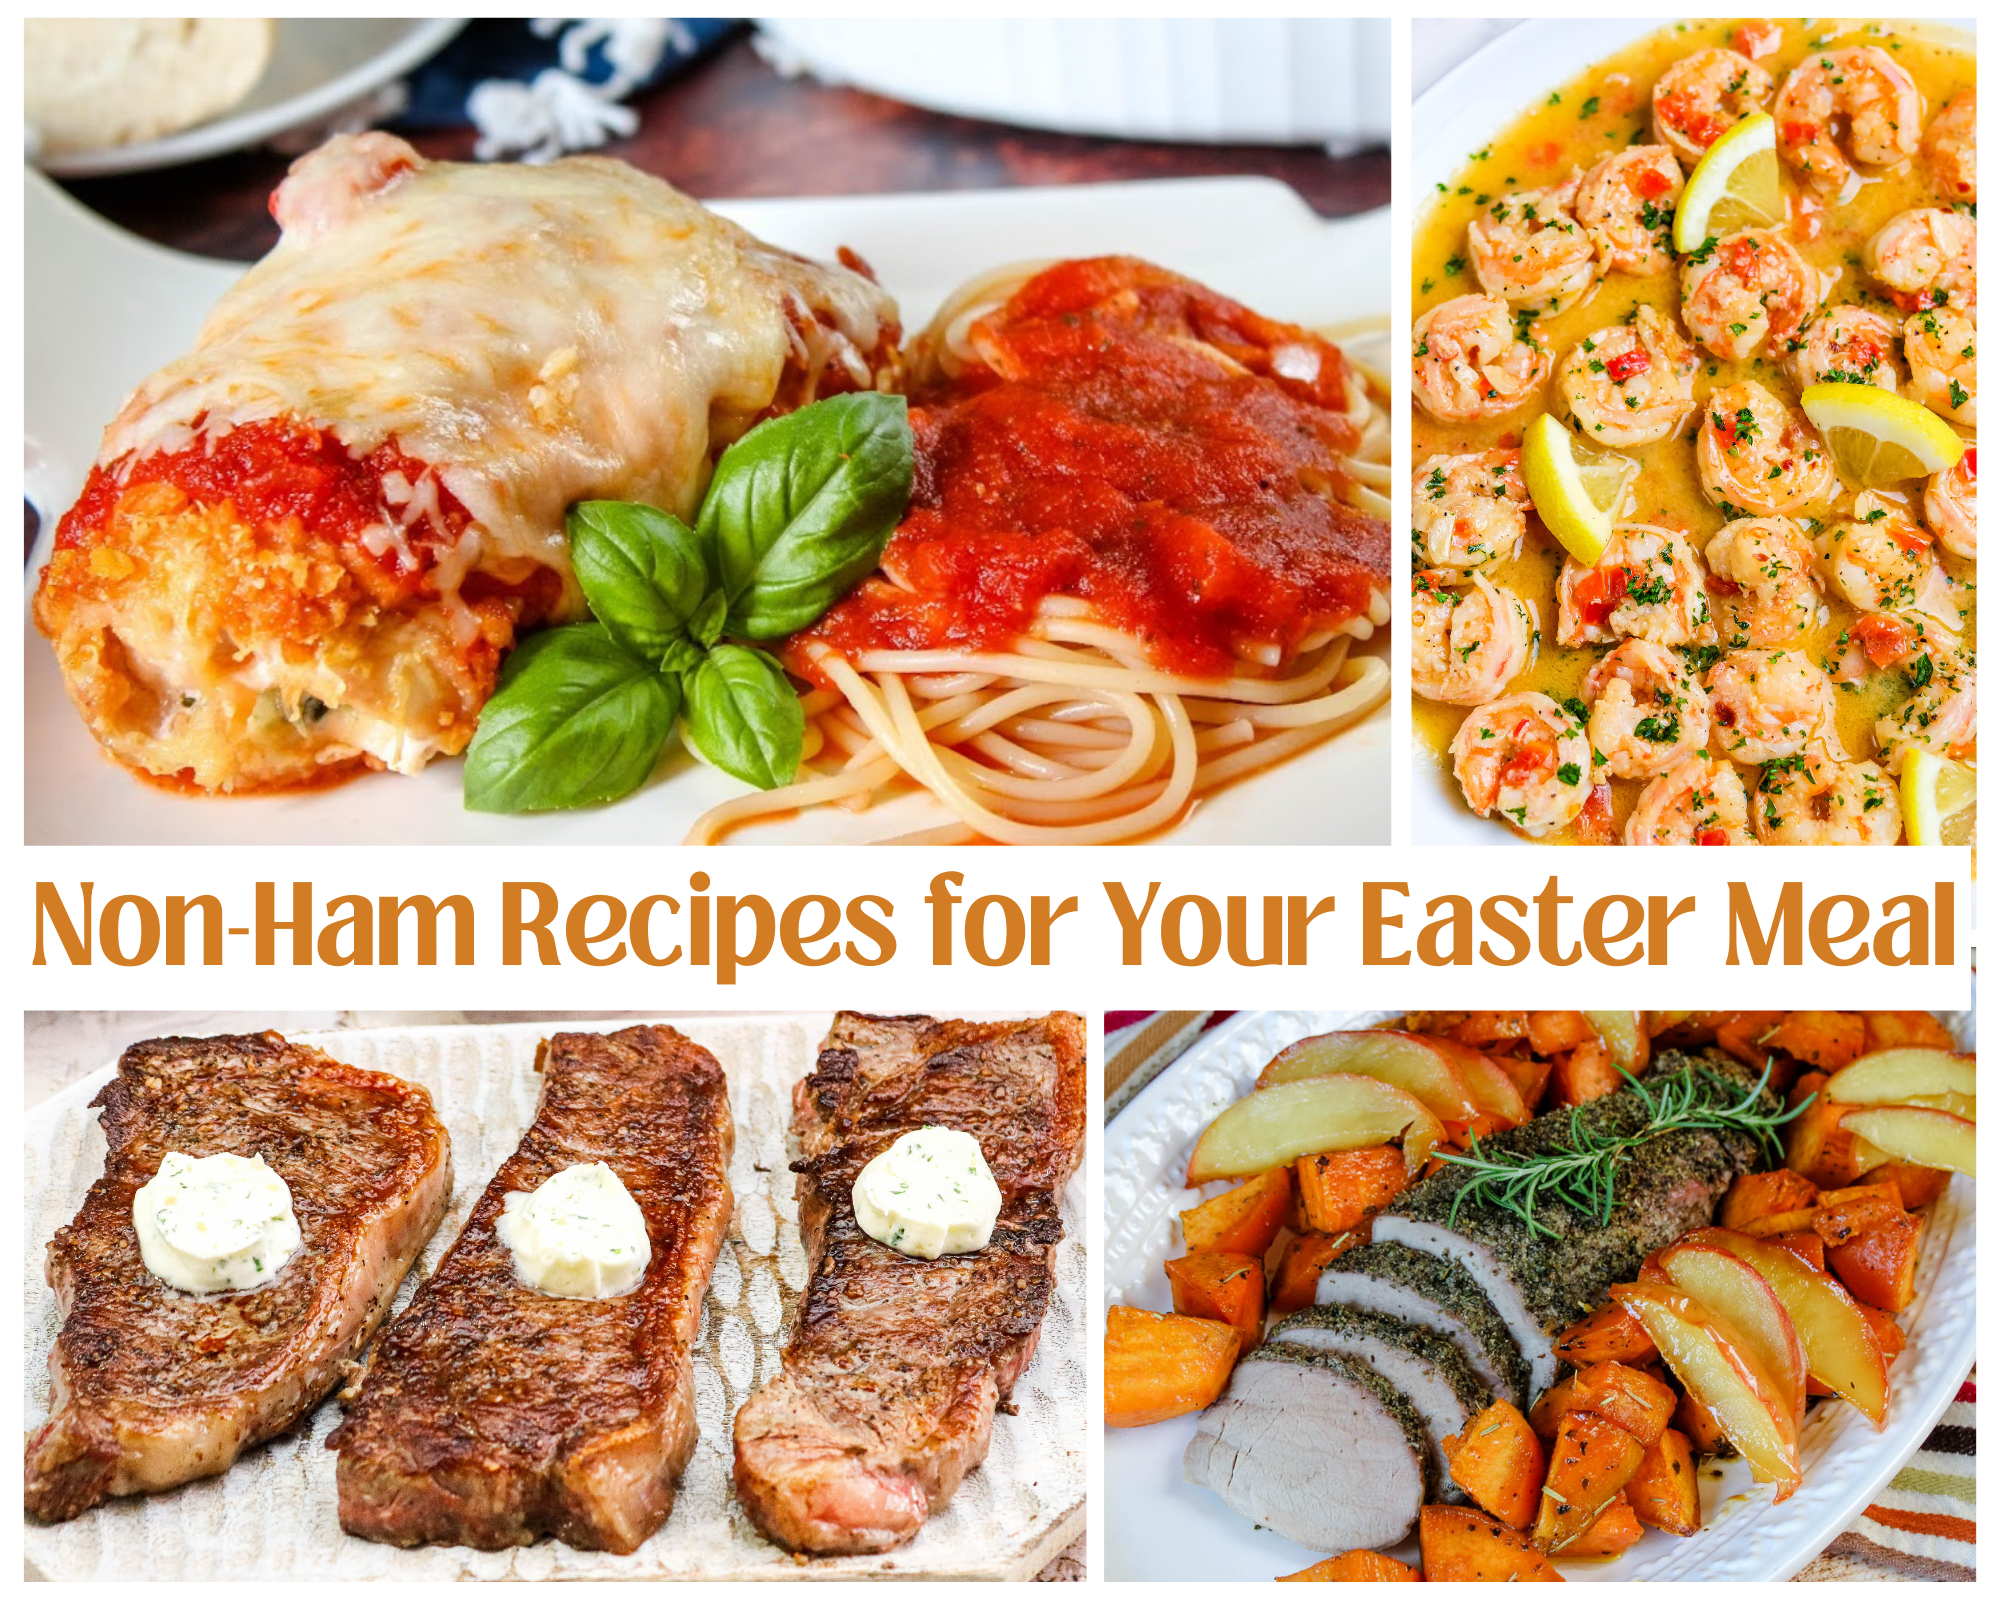 Non-Ham Recipes for Your Easter Meal